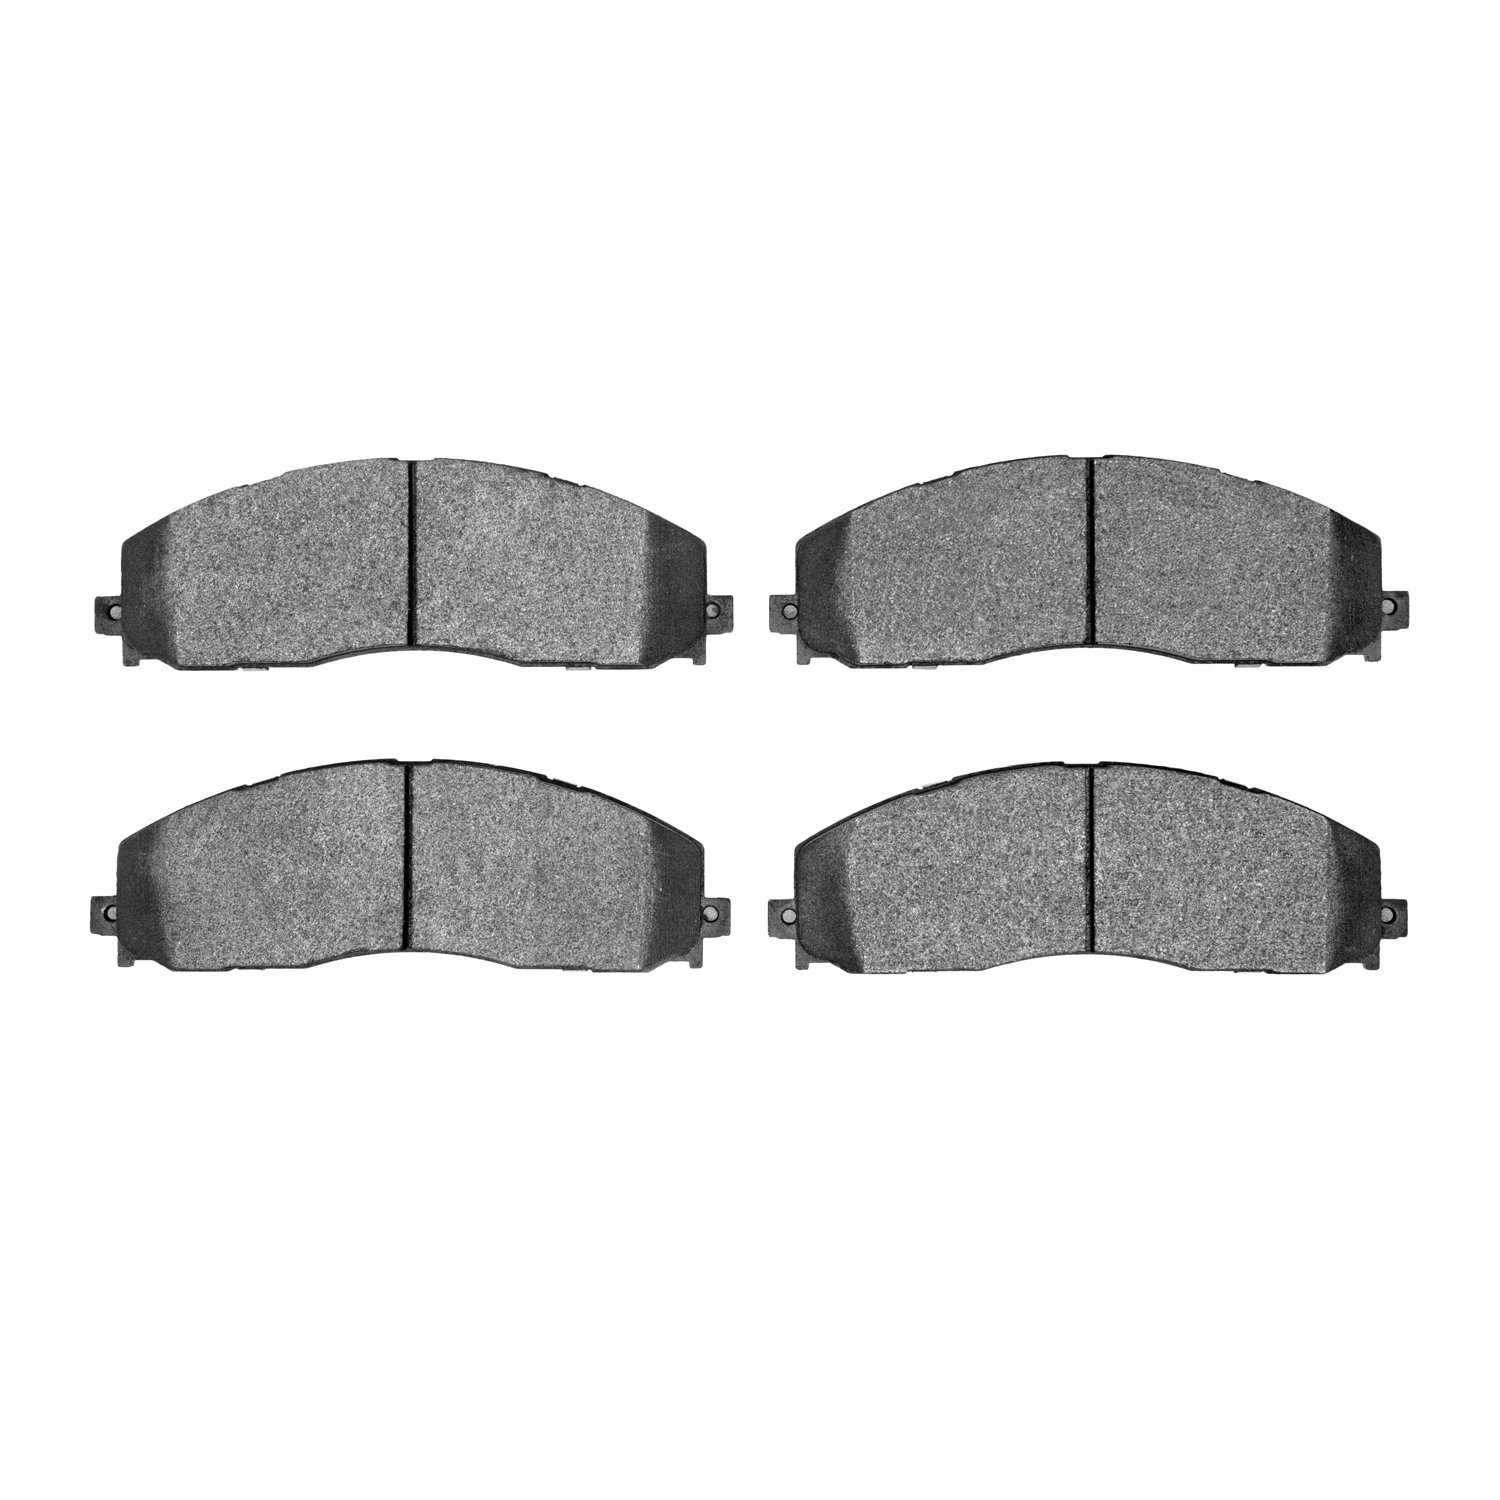 Ultimate-Duty Brake Pads Kit, Fits Select Ford/Lincoln/Mercury/Mazda